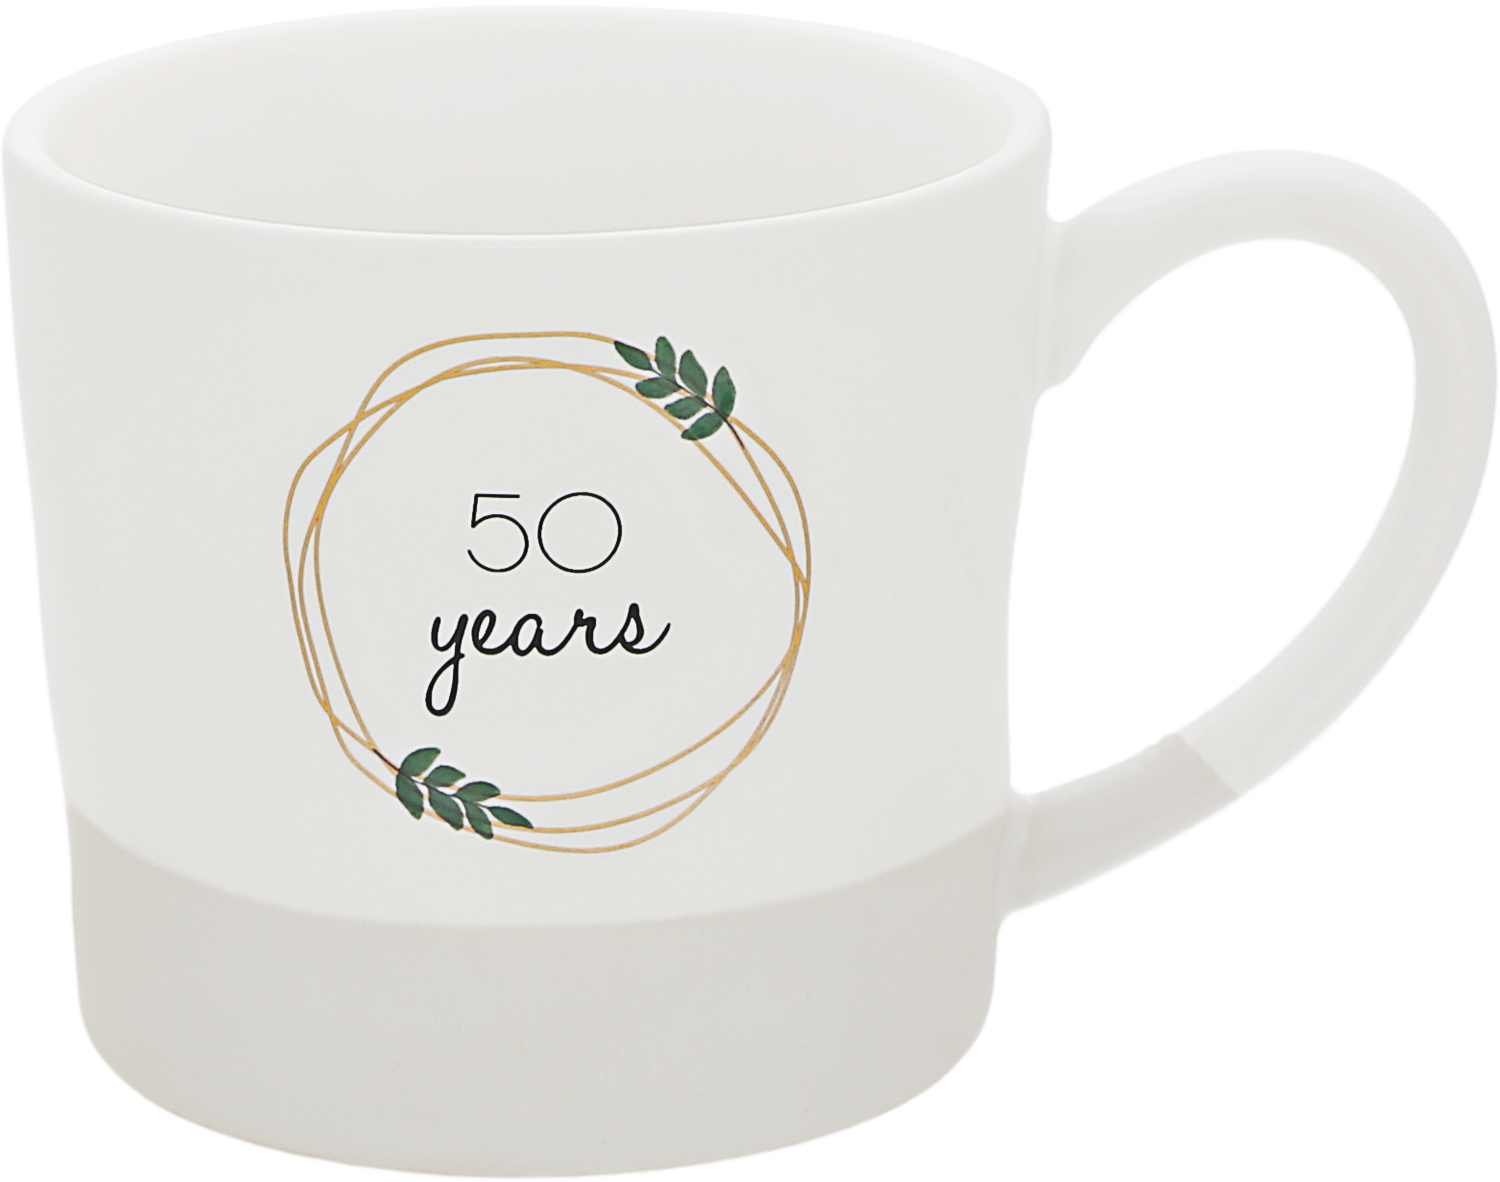 50 Years by Love Grows - 50 Years - 15 oz Cup